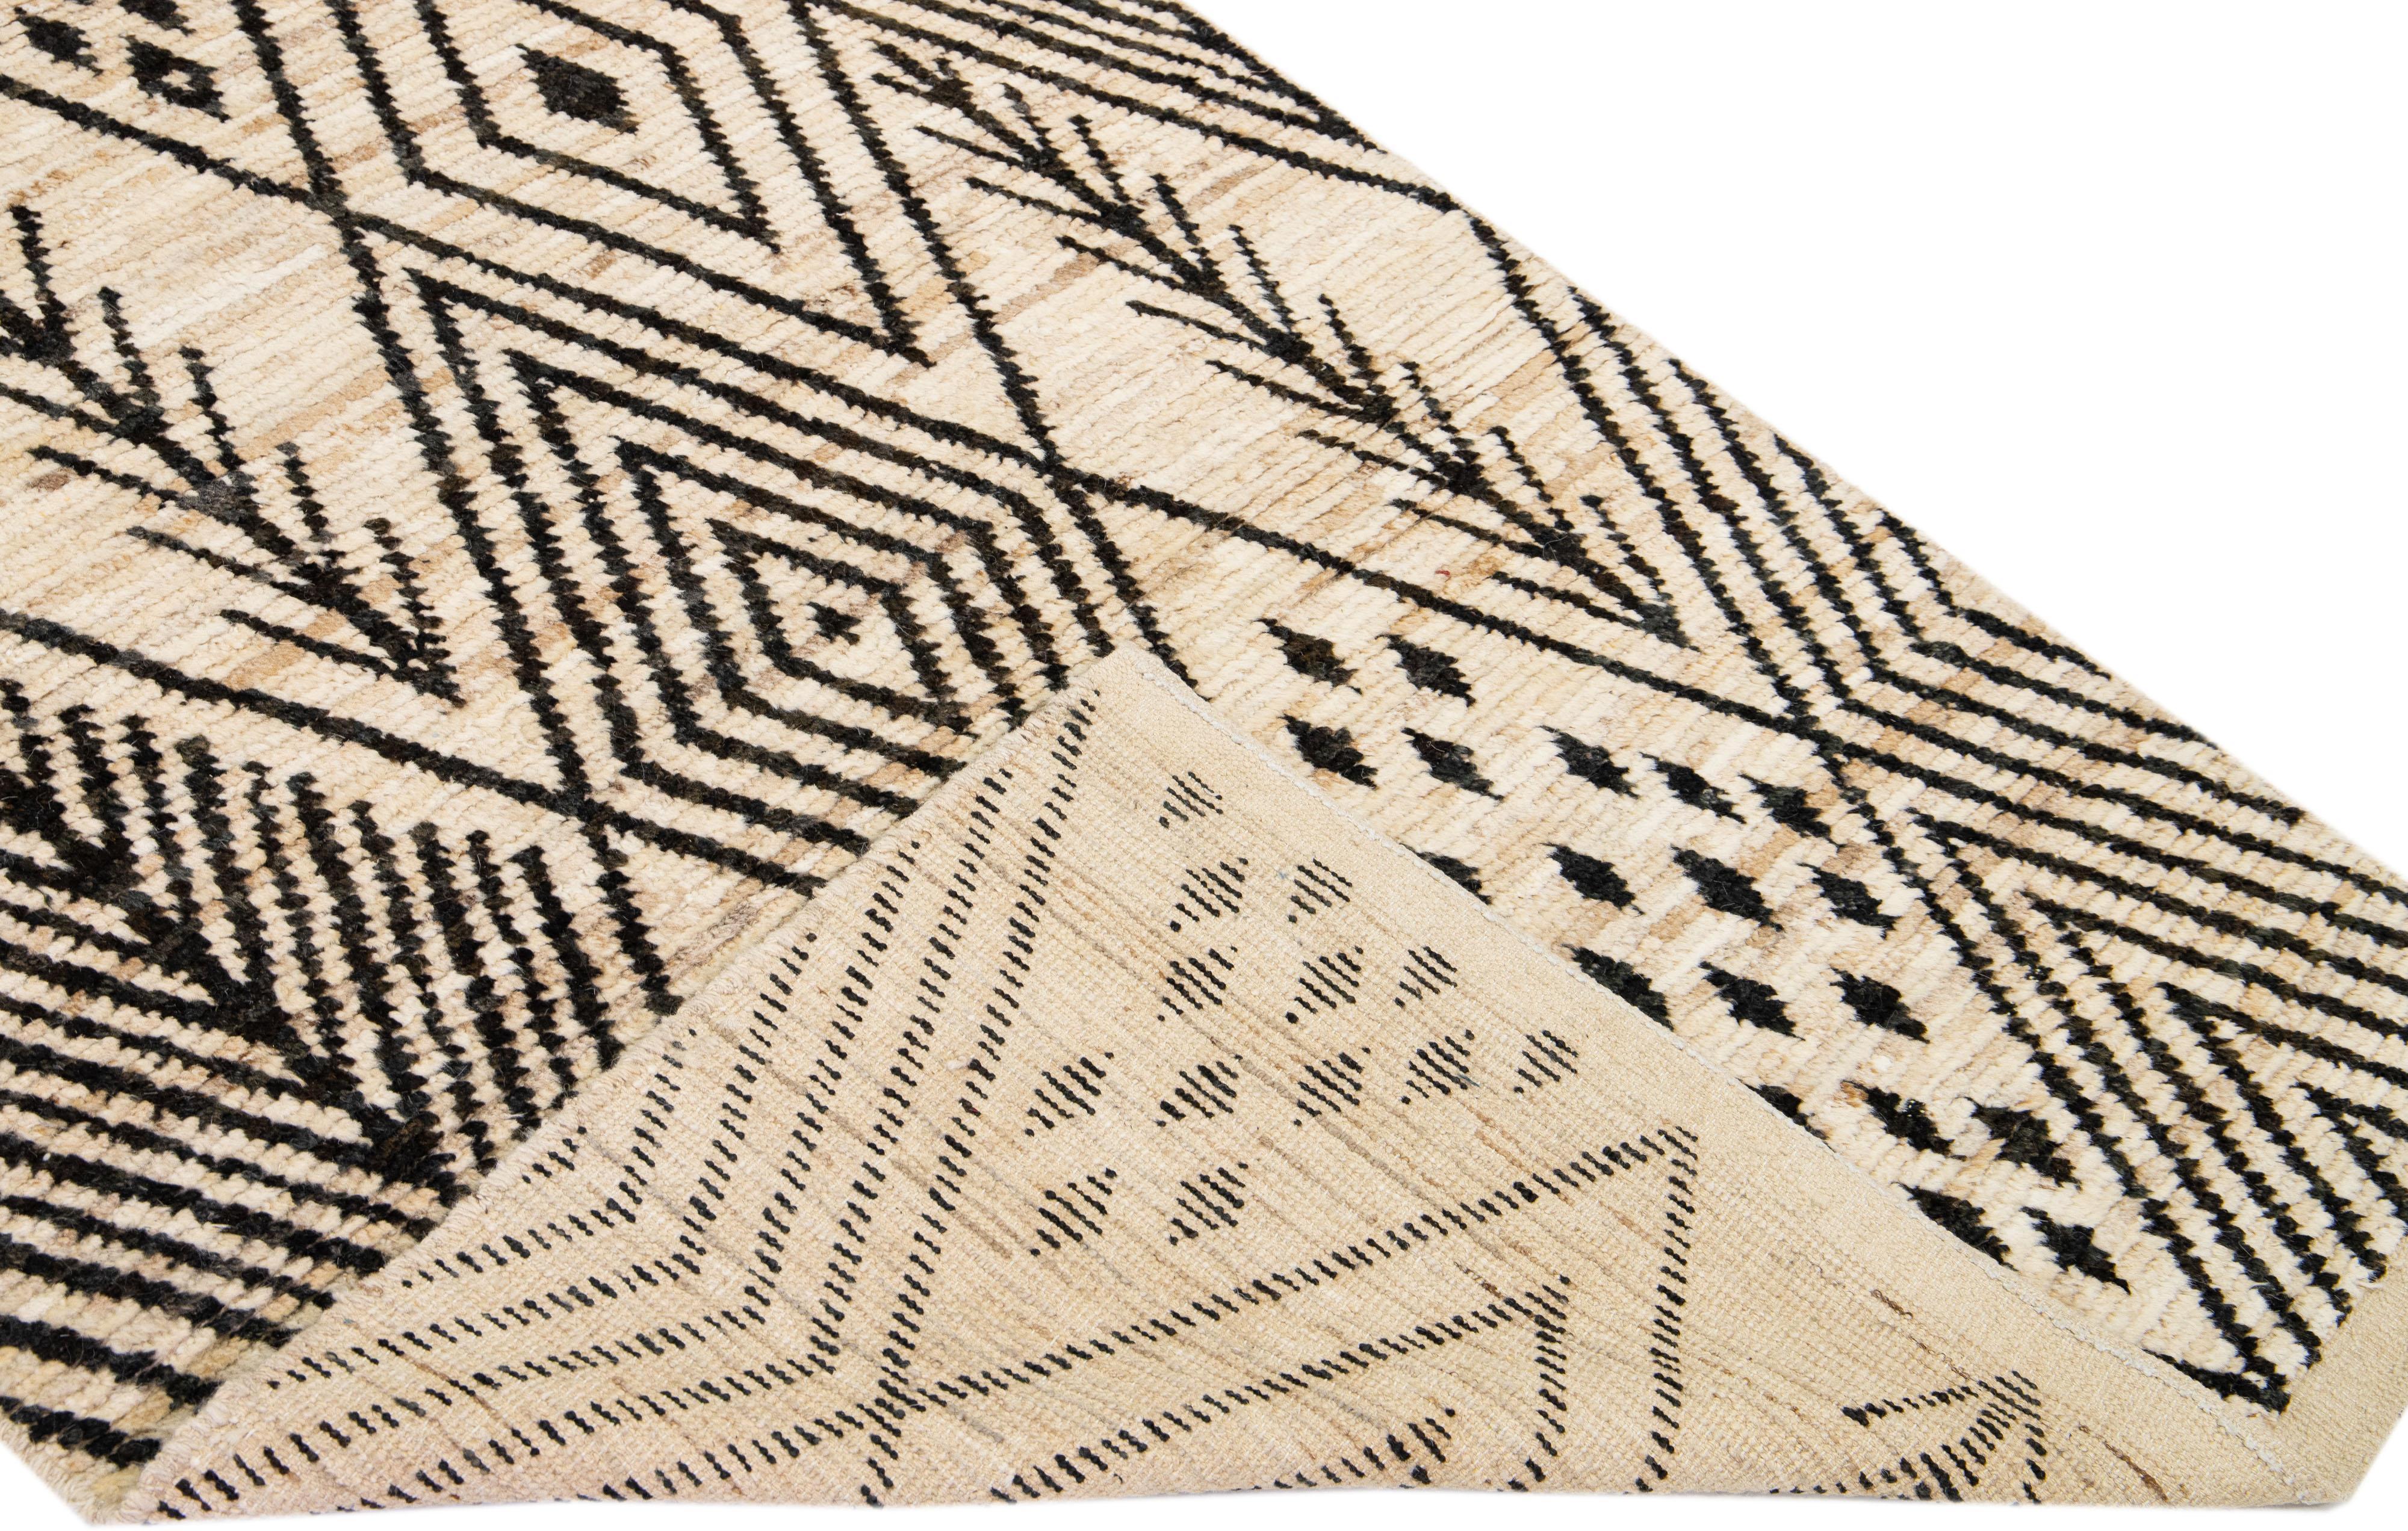 Beautiful Moroccan-style handmade wool rug with a beige field. This Modern rug has dark brown accents featuring a gorgeous all-over geometric tribal design.

This rug measures: 4'5